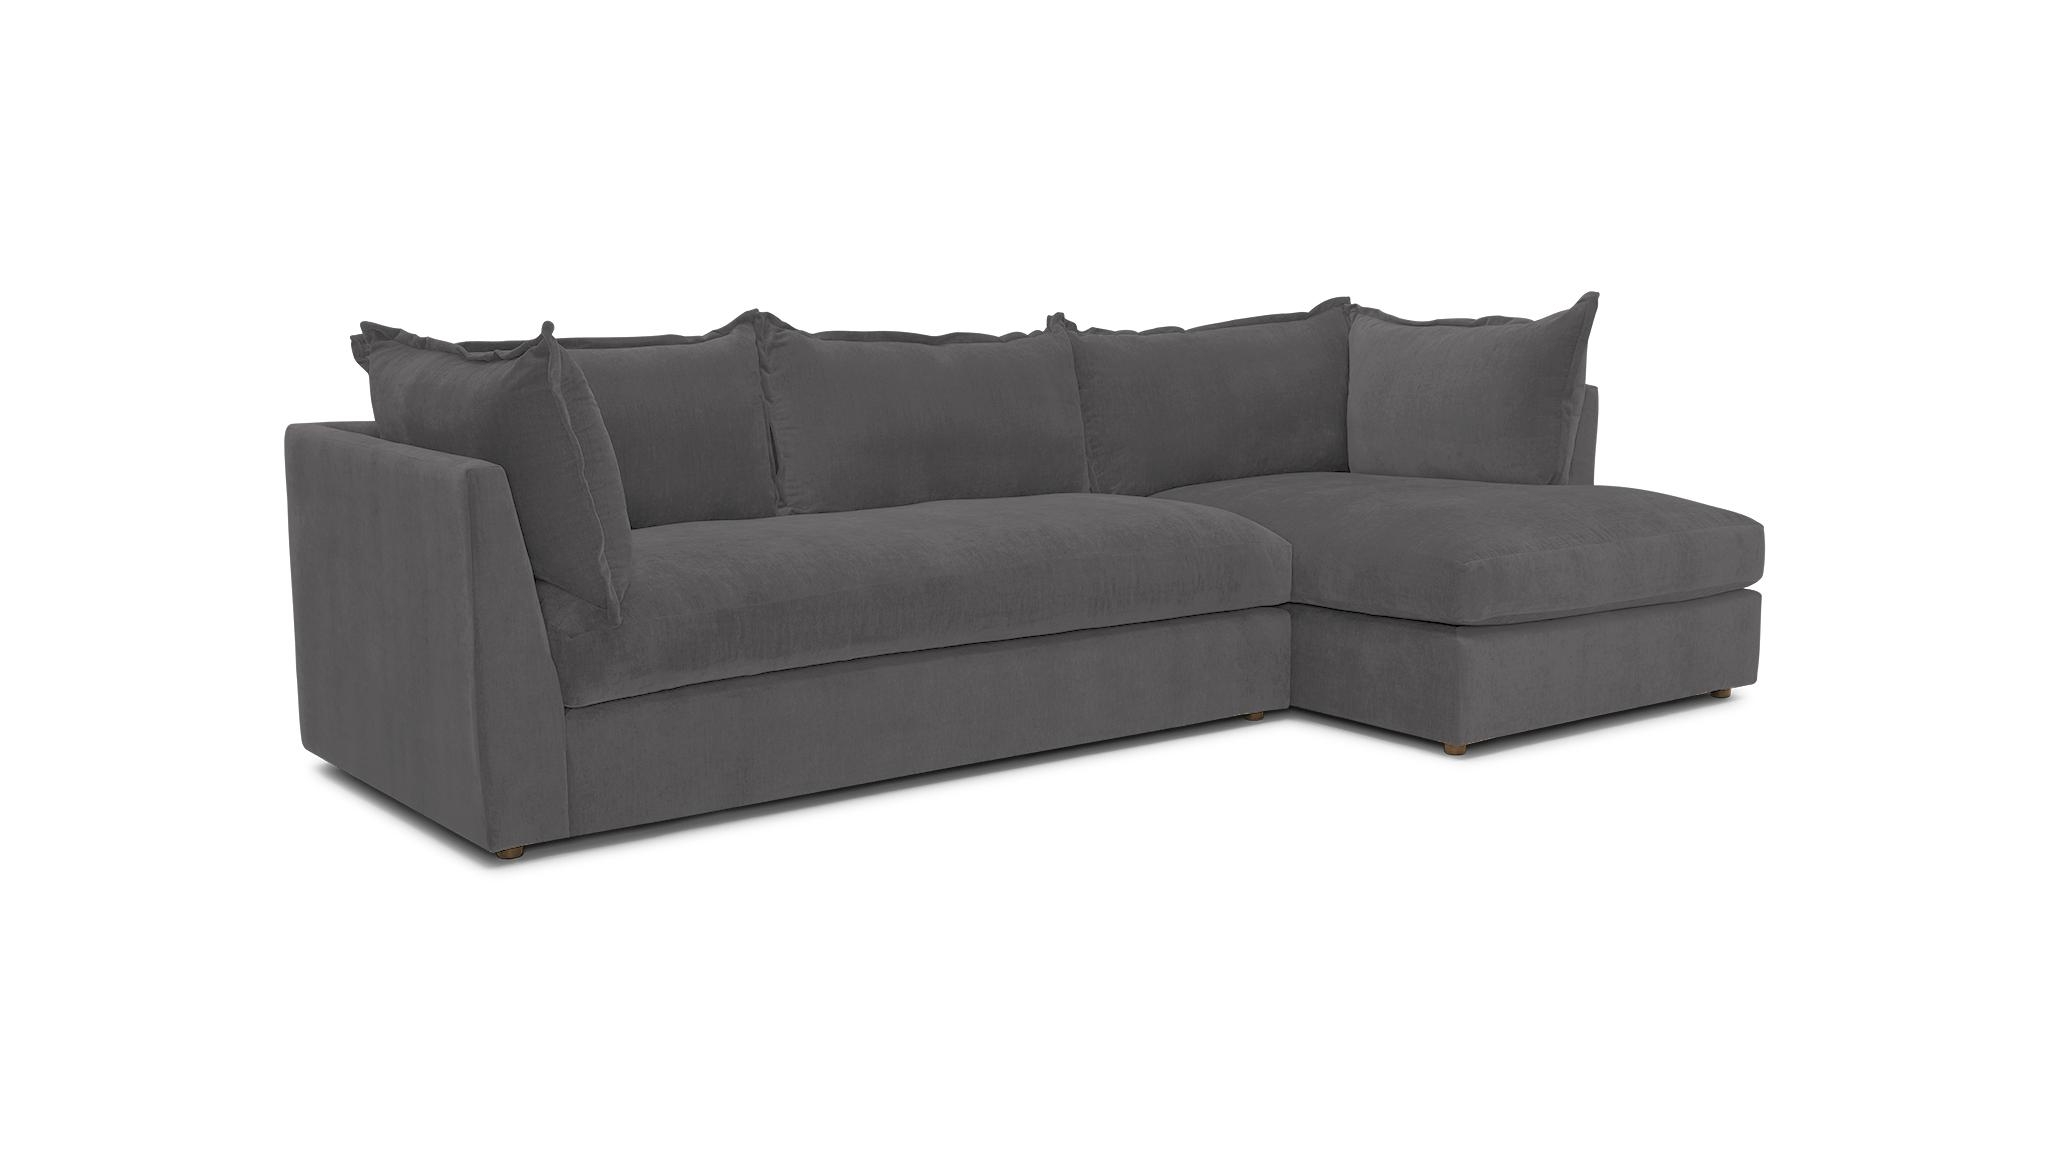 Gray Wilder Mid Century Modern Sectional - Royale Ash - Right - Image 1